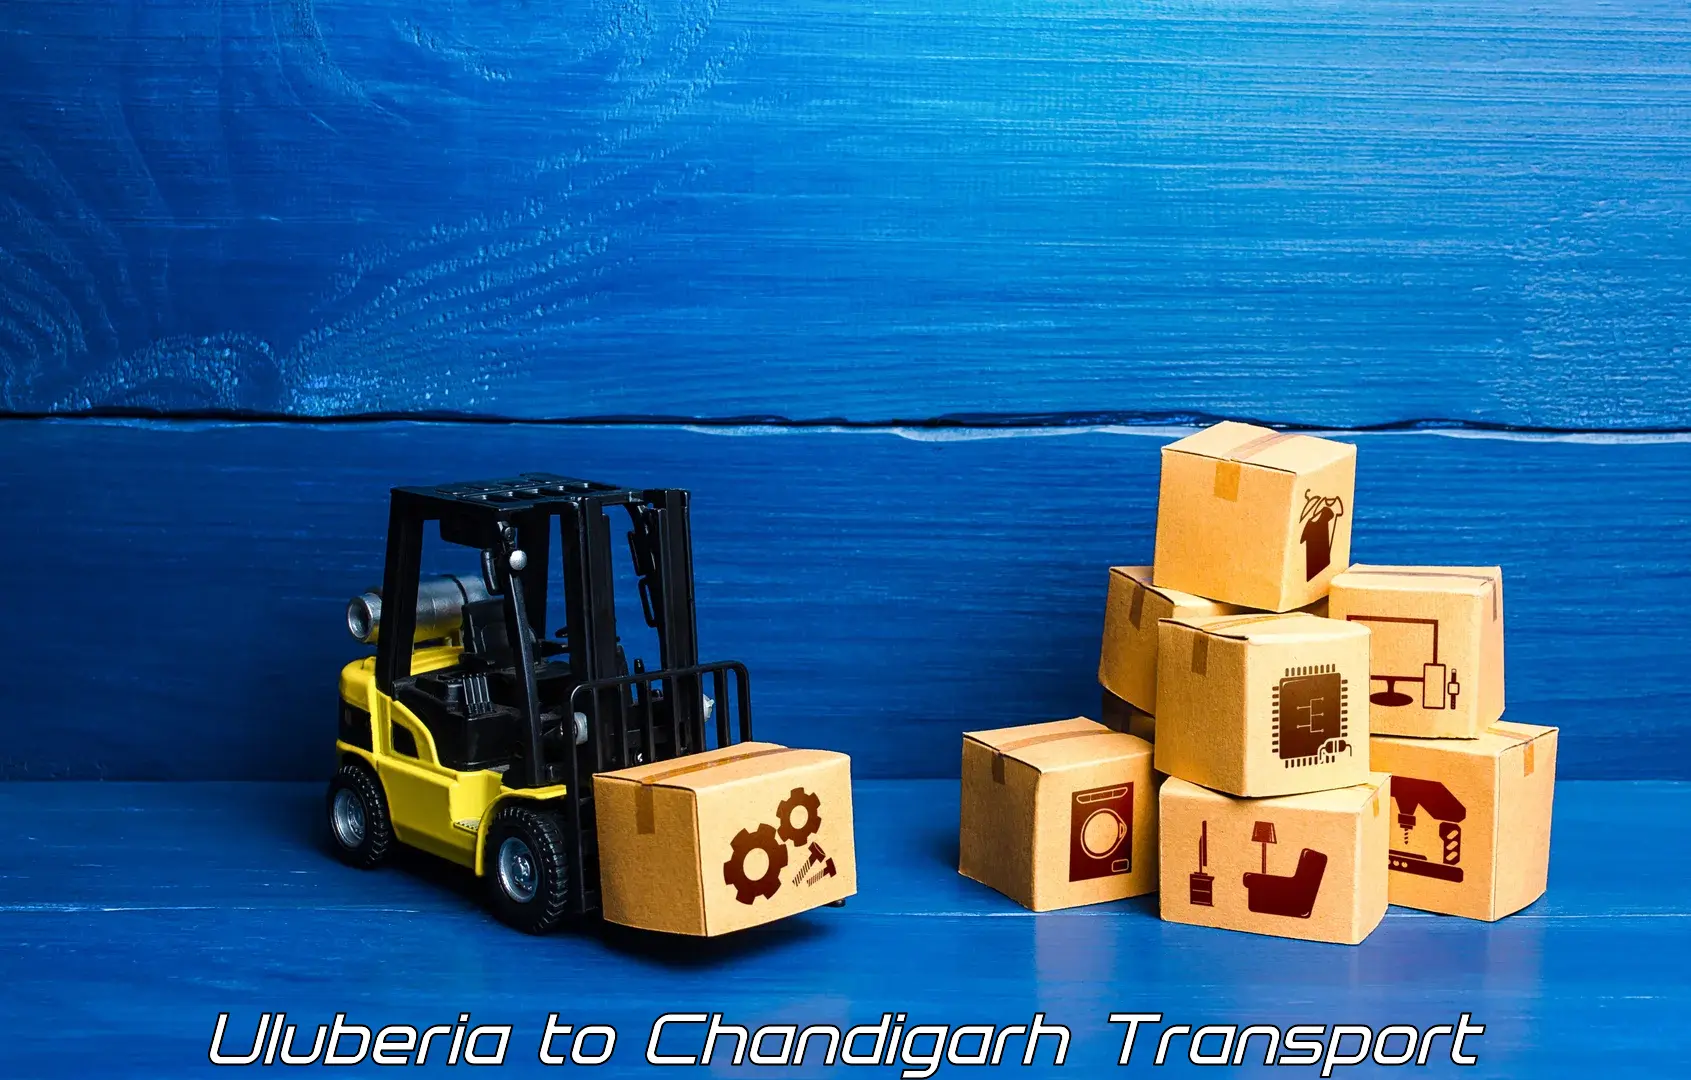 Transportation solution services Uluberia to Chandigarh